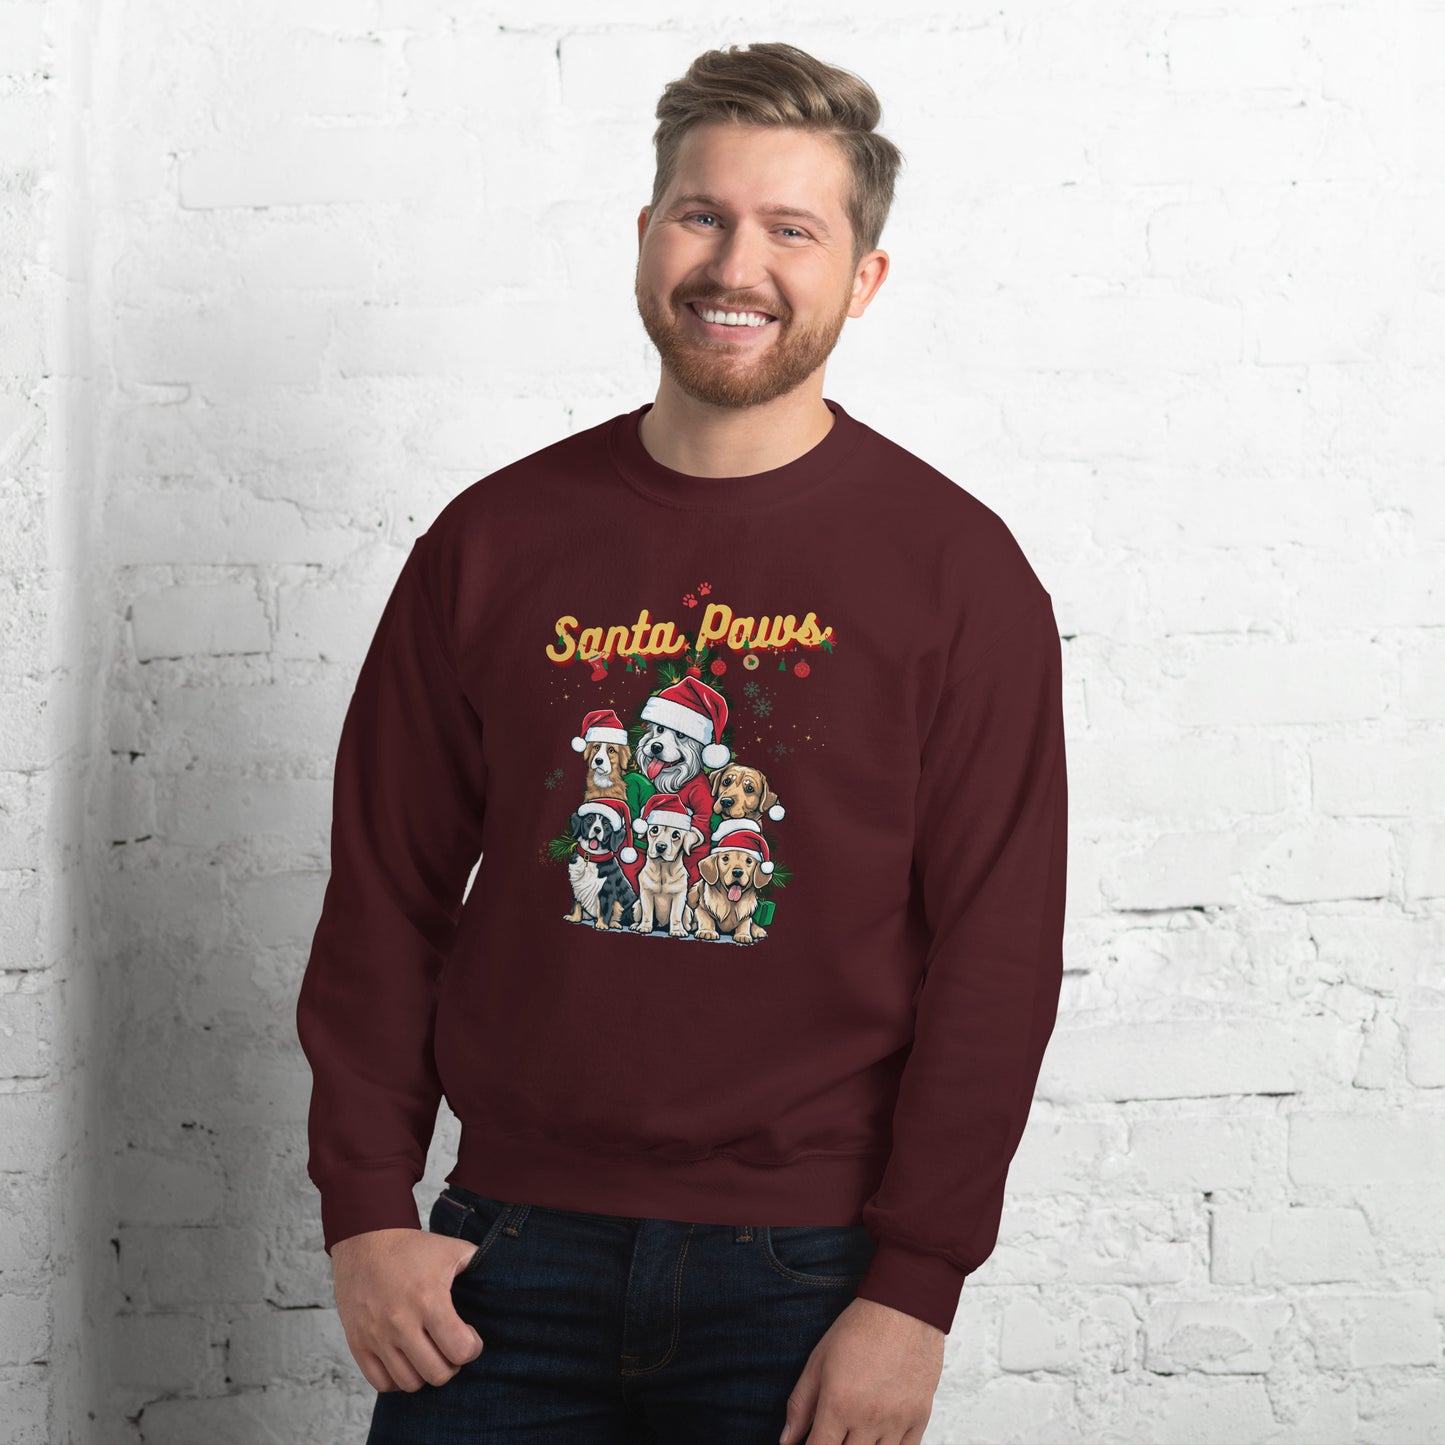 Santa Paws Unisex Sweatshirt - Cozy Winter Apparel for Pet Lovers | Festive Comfort, Warmth, and Style